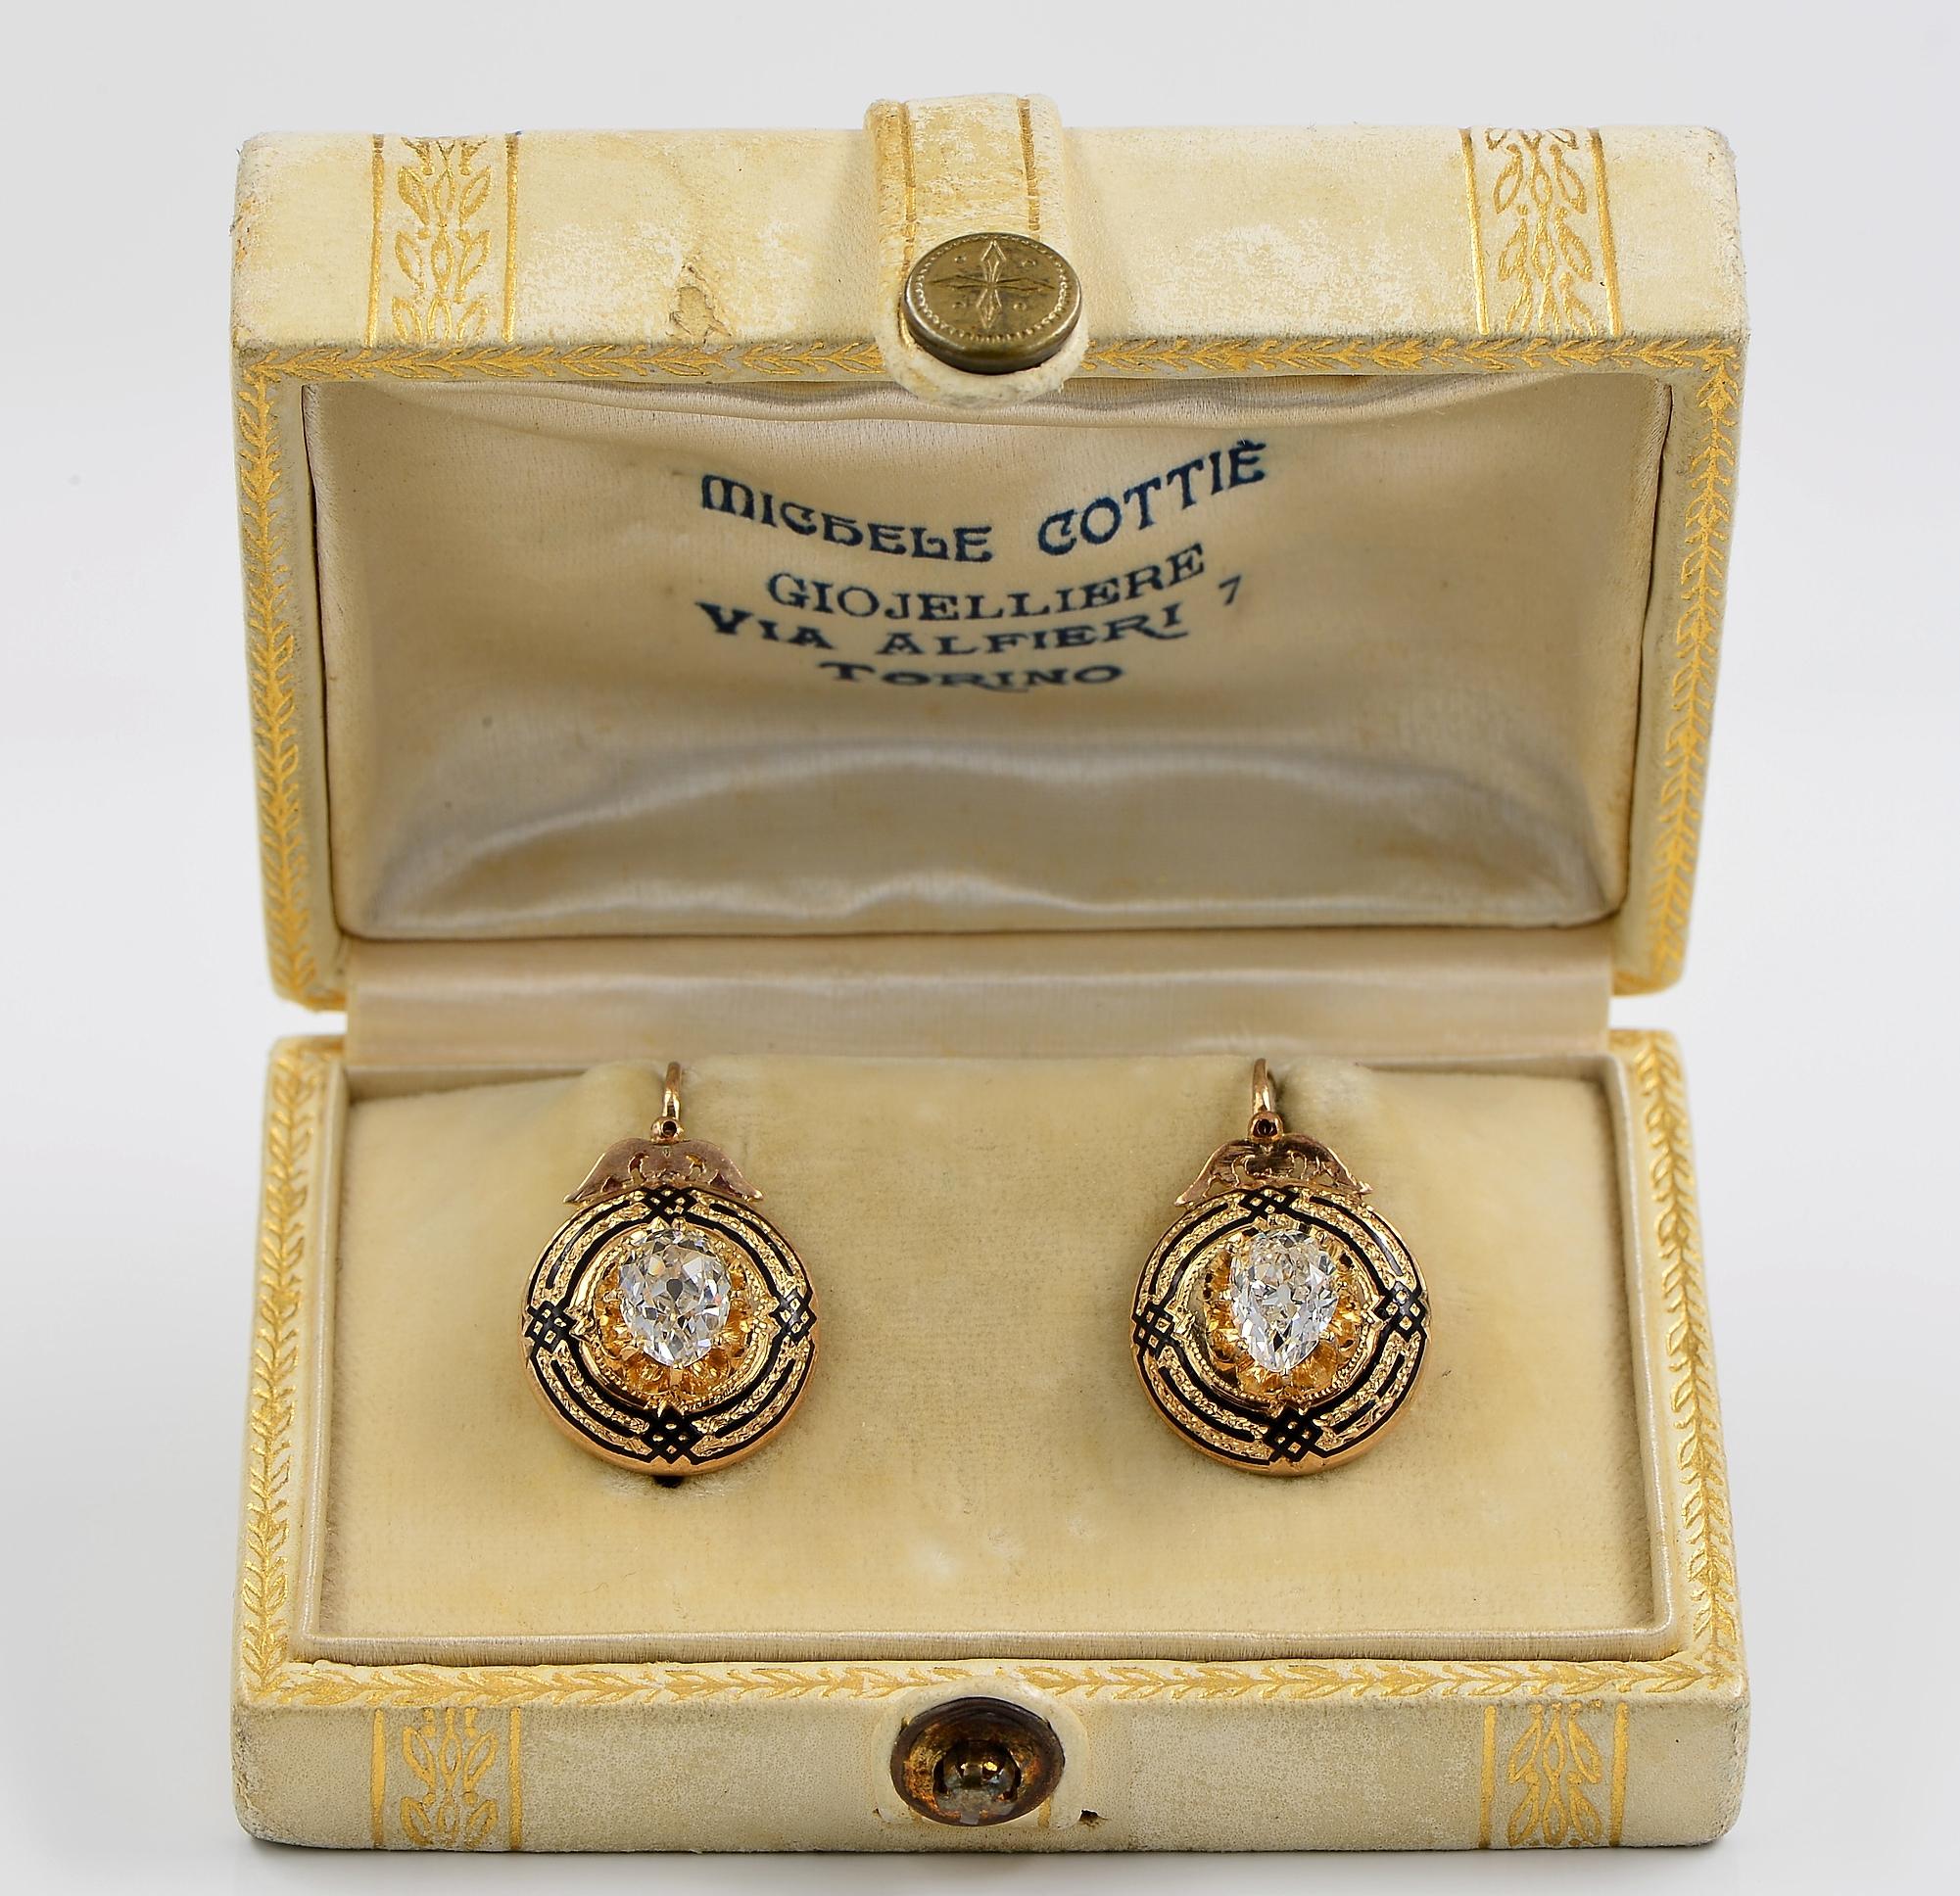 Rare Find
Sensational pair of Victorian Diamond solitaire earrings 1860 ca
They come complete with their original white casket leather box with the initial of the owner of that time
They have romantic design modelled from 18 KT gold delineated with